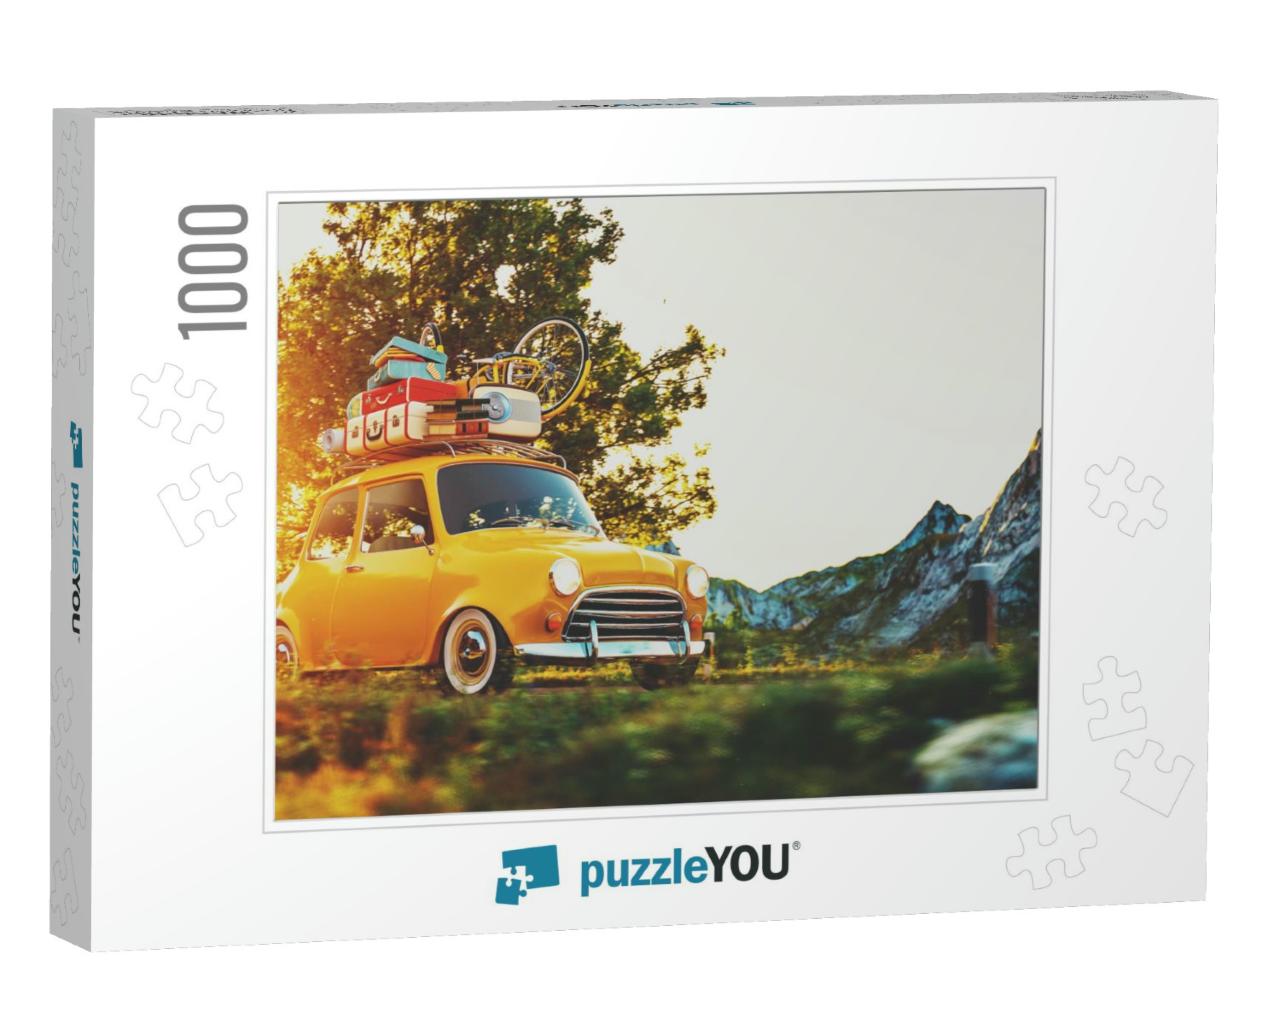 Cute Little Retro Car with Suitcases & Bicycle on Top Goe... Jigsaw Puzzle with 1000 pieces